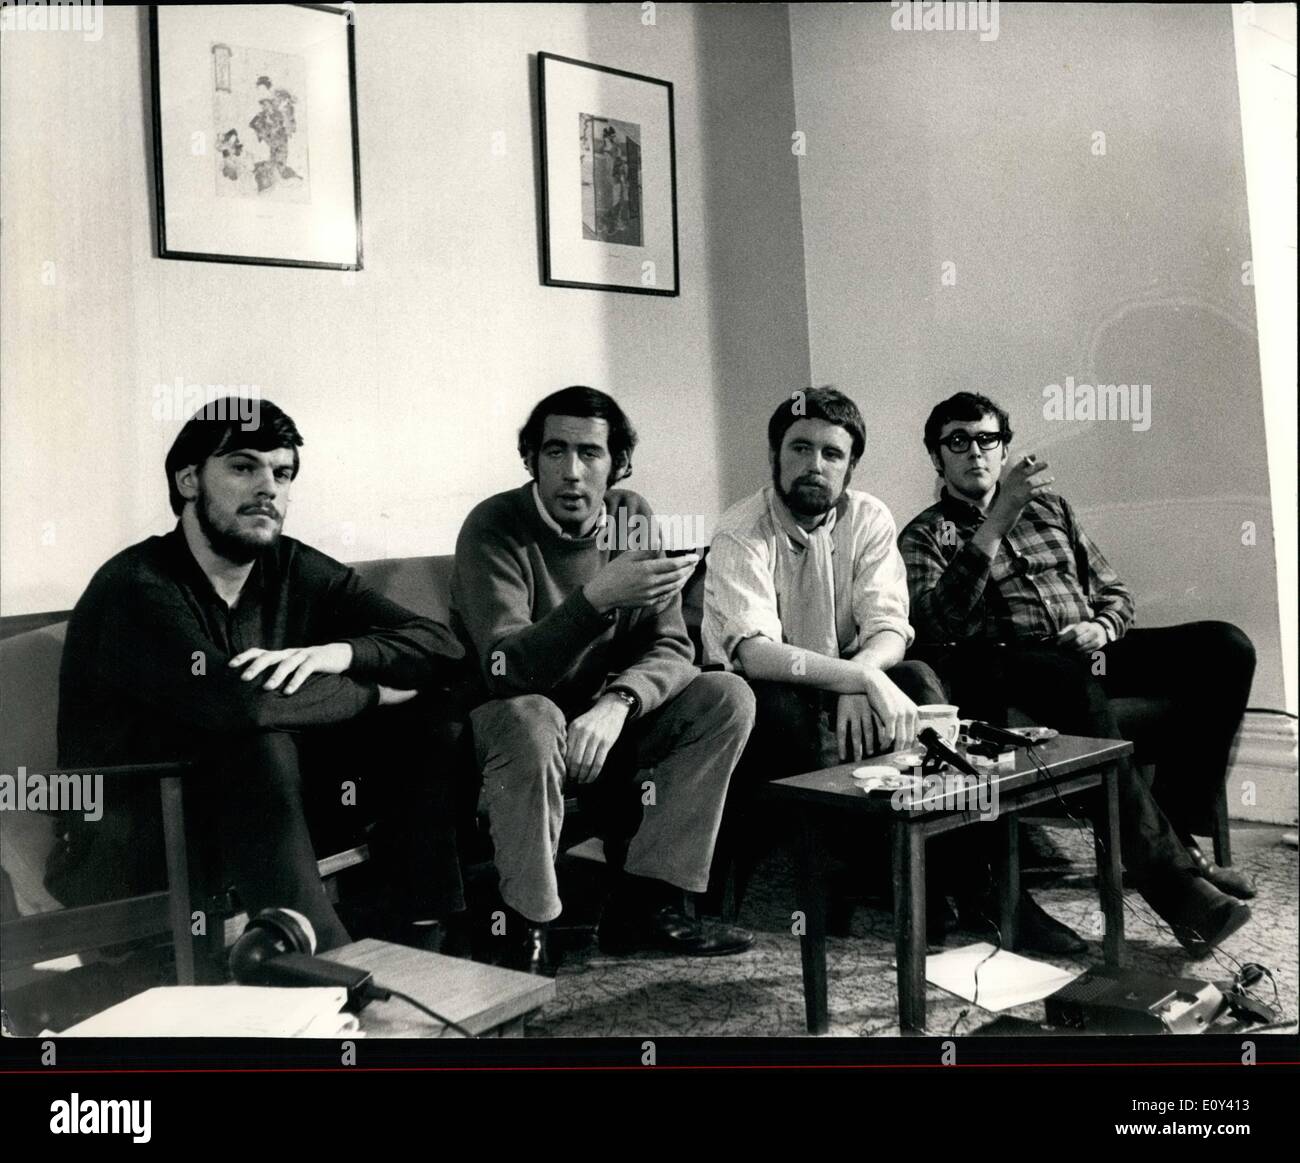 Oct. 10, 1968 - LSE taken over by the students: The London school of Economics which was closed today for an indefinite period by ts director Dr. Walter Adams-was taken over this afternoon by the students. Photo shows the Ad Hoe Occupation Committee L-R Martin Thomkinson, Tommy Bower, Tony Harrison and Gino Franco seen during the press conference at the London School of Economics this evening. Stock Photo